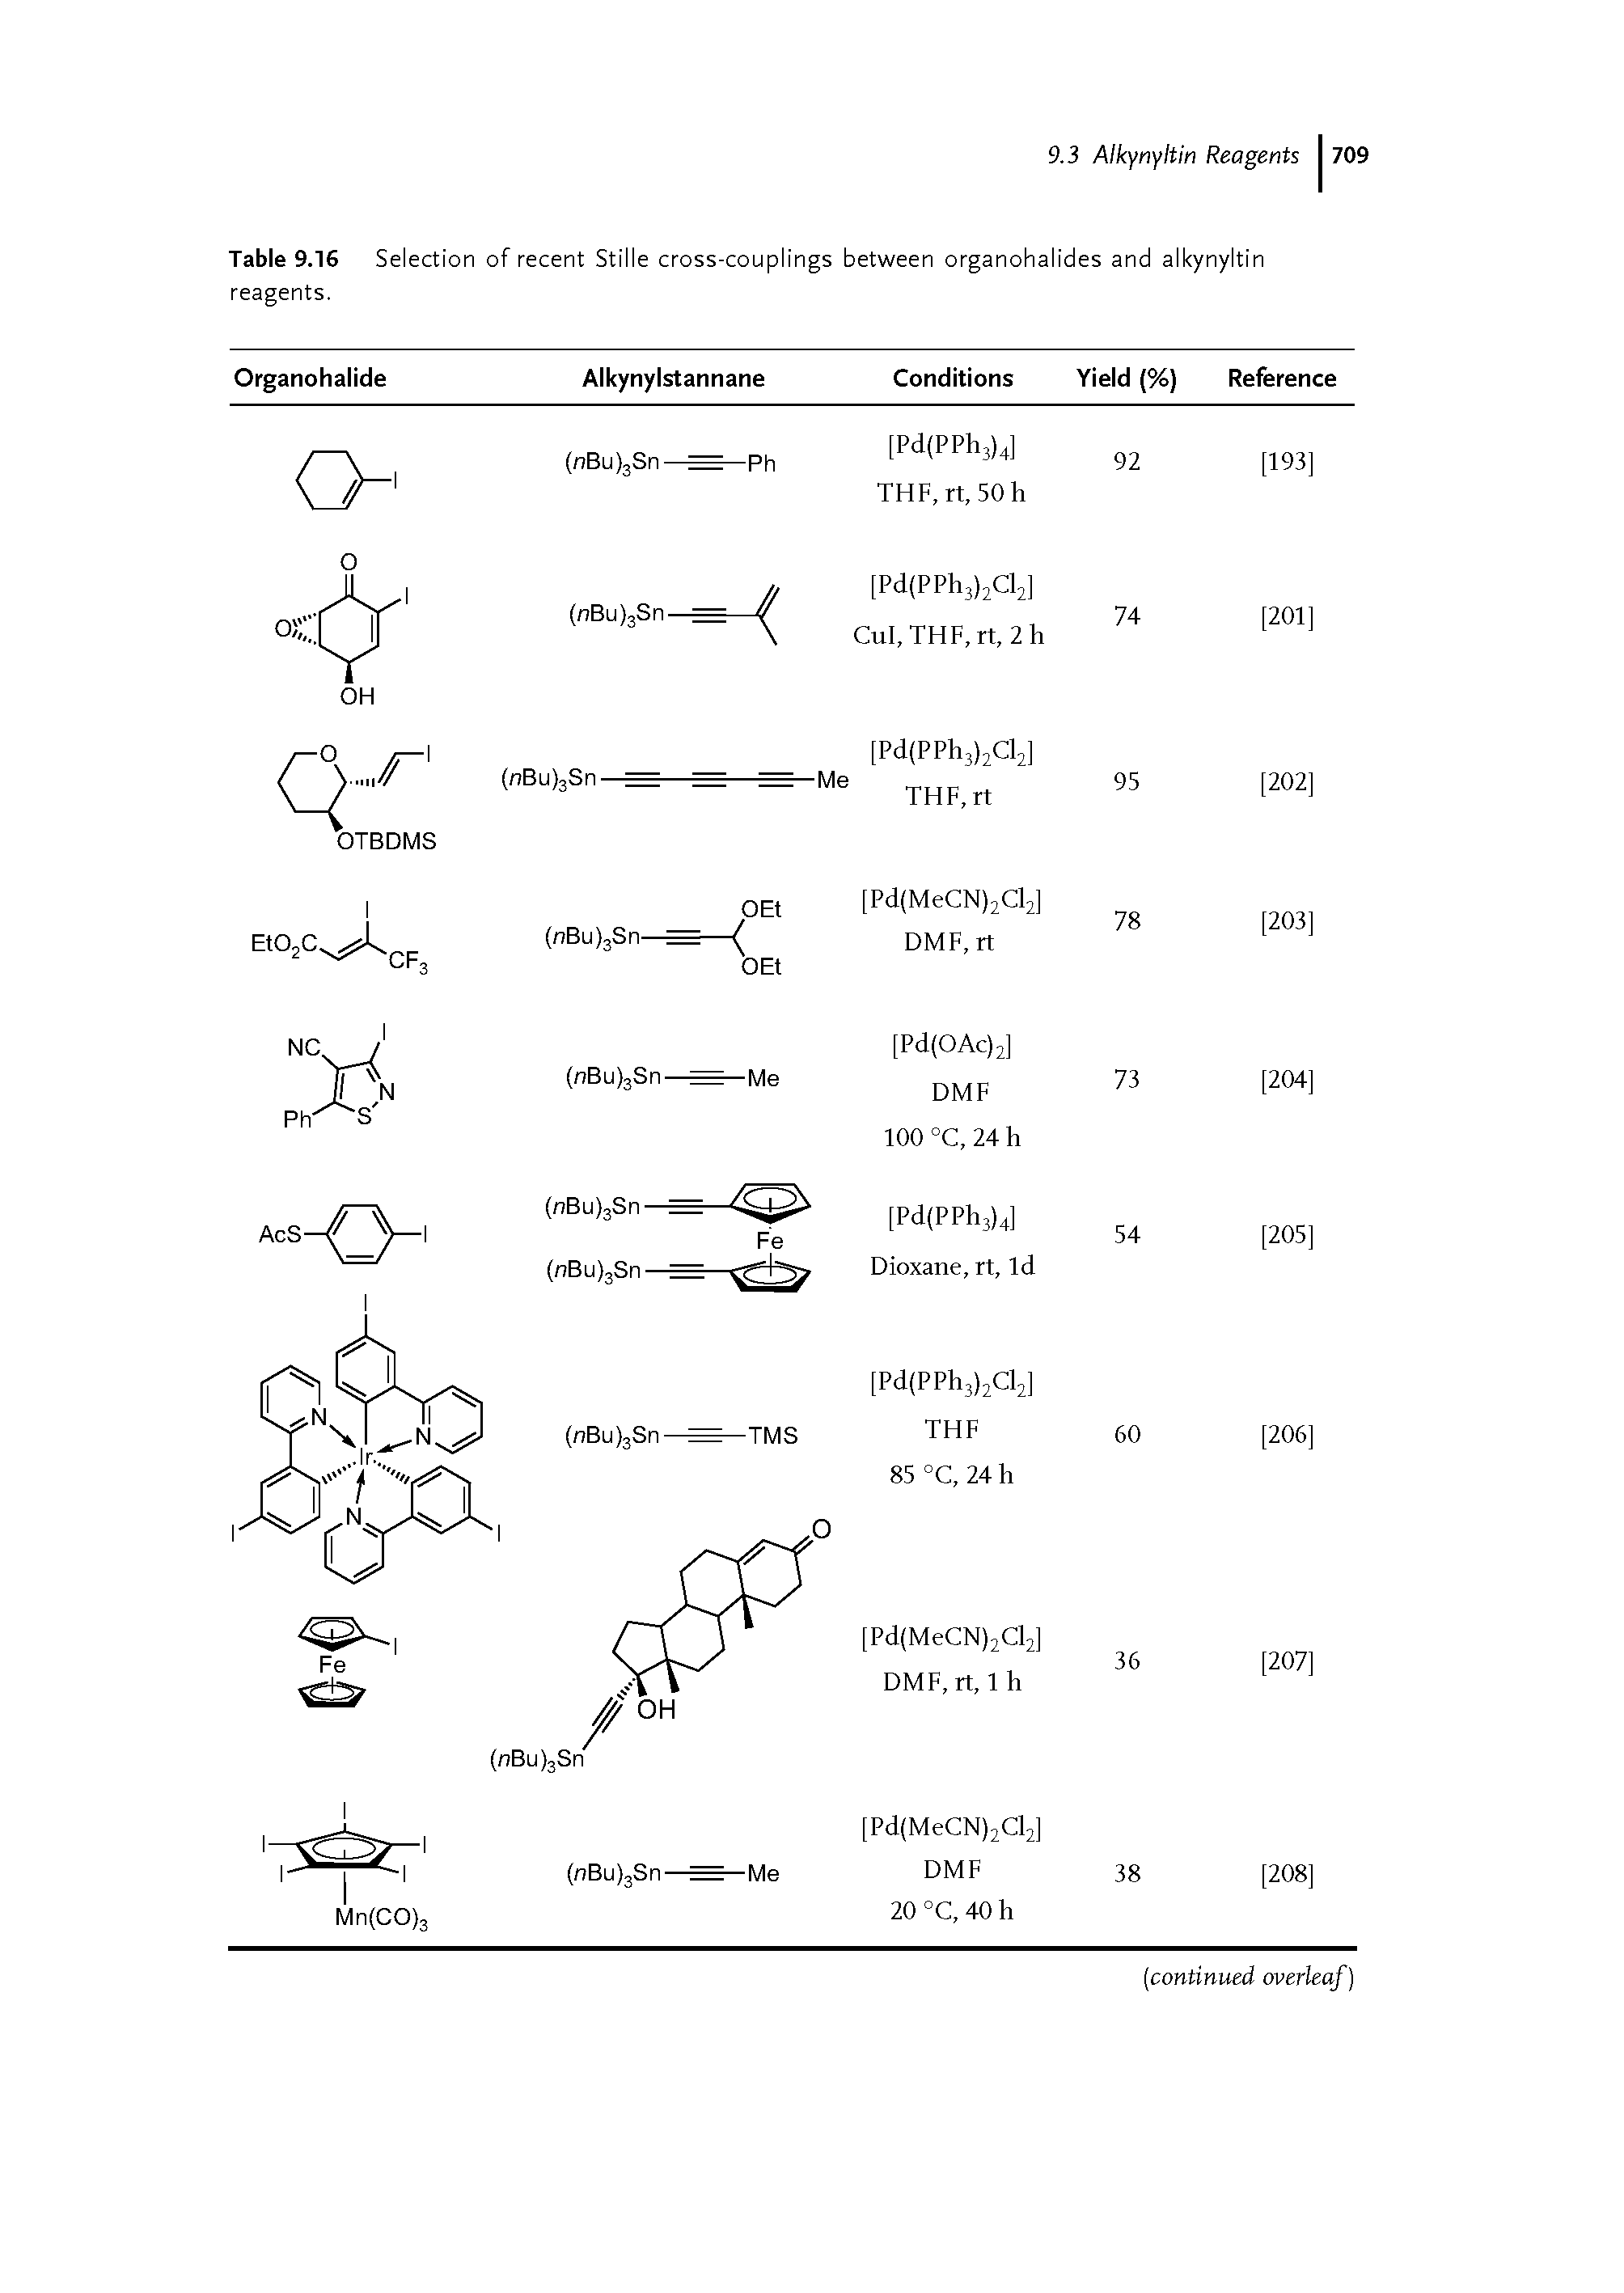 Table 9.16 Selection of recent Stille cross-couplings between organohalides and alkynyltin reagents.